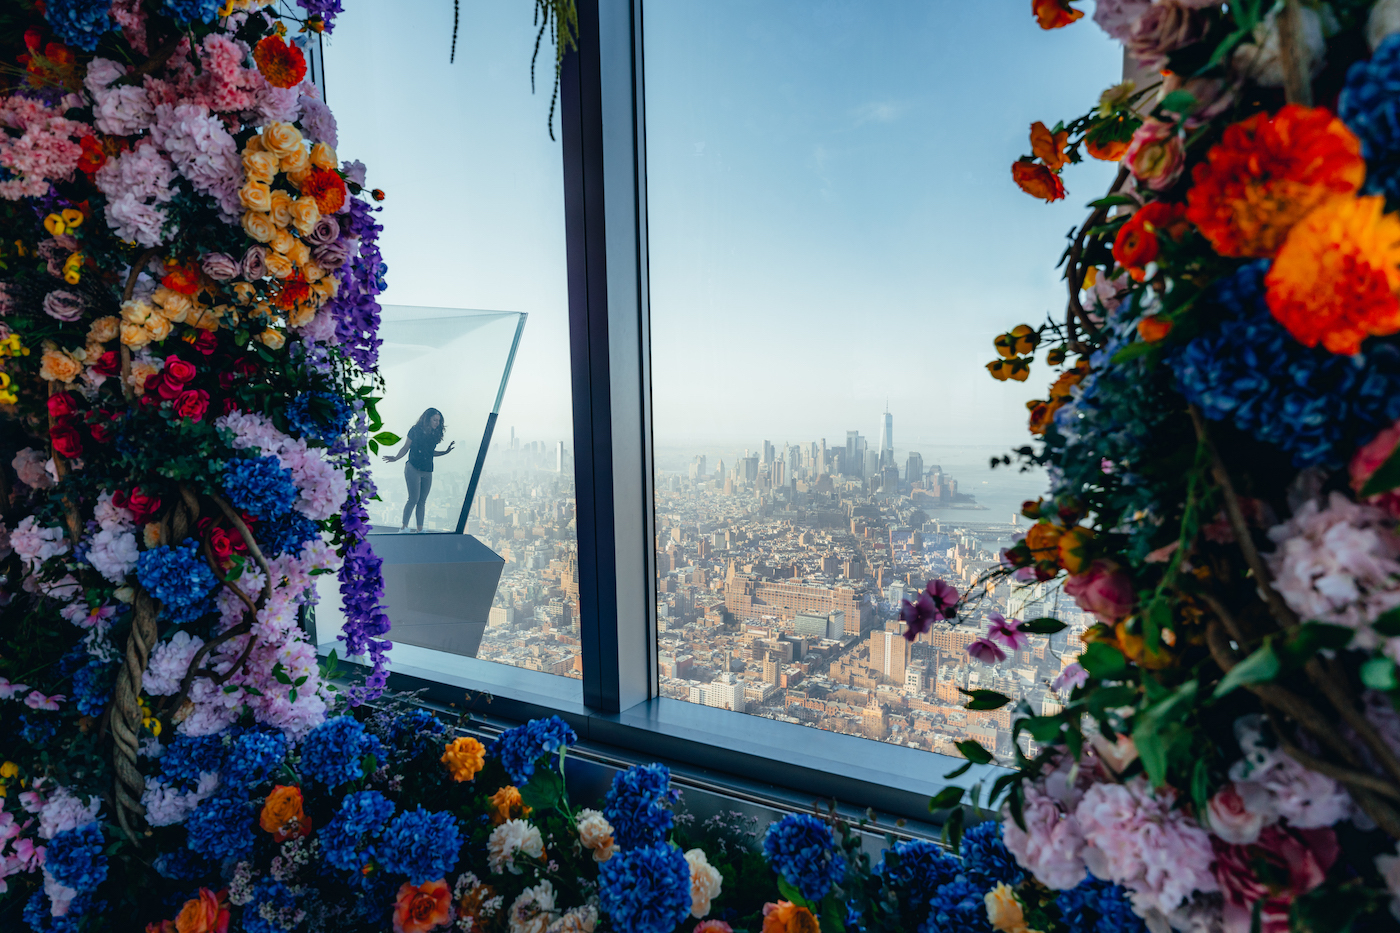 An immersive flower experience is opening at Edge